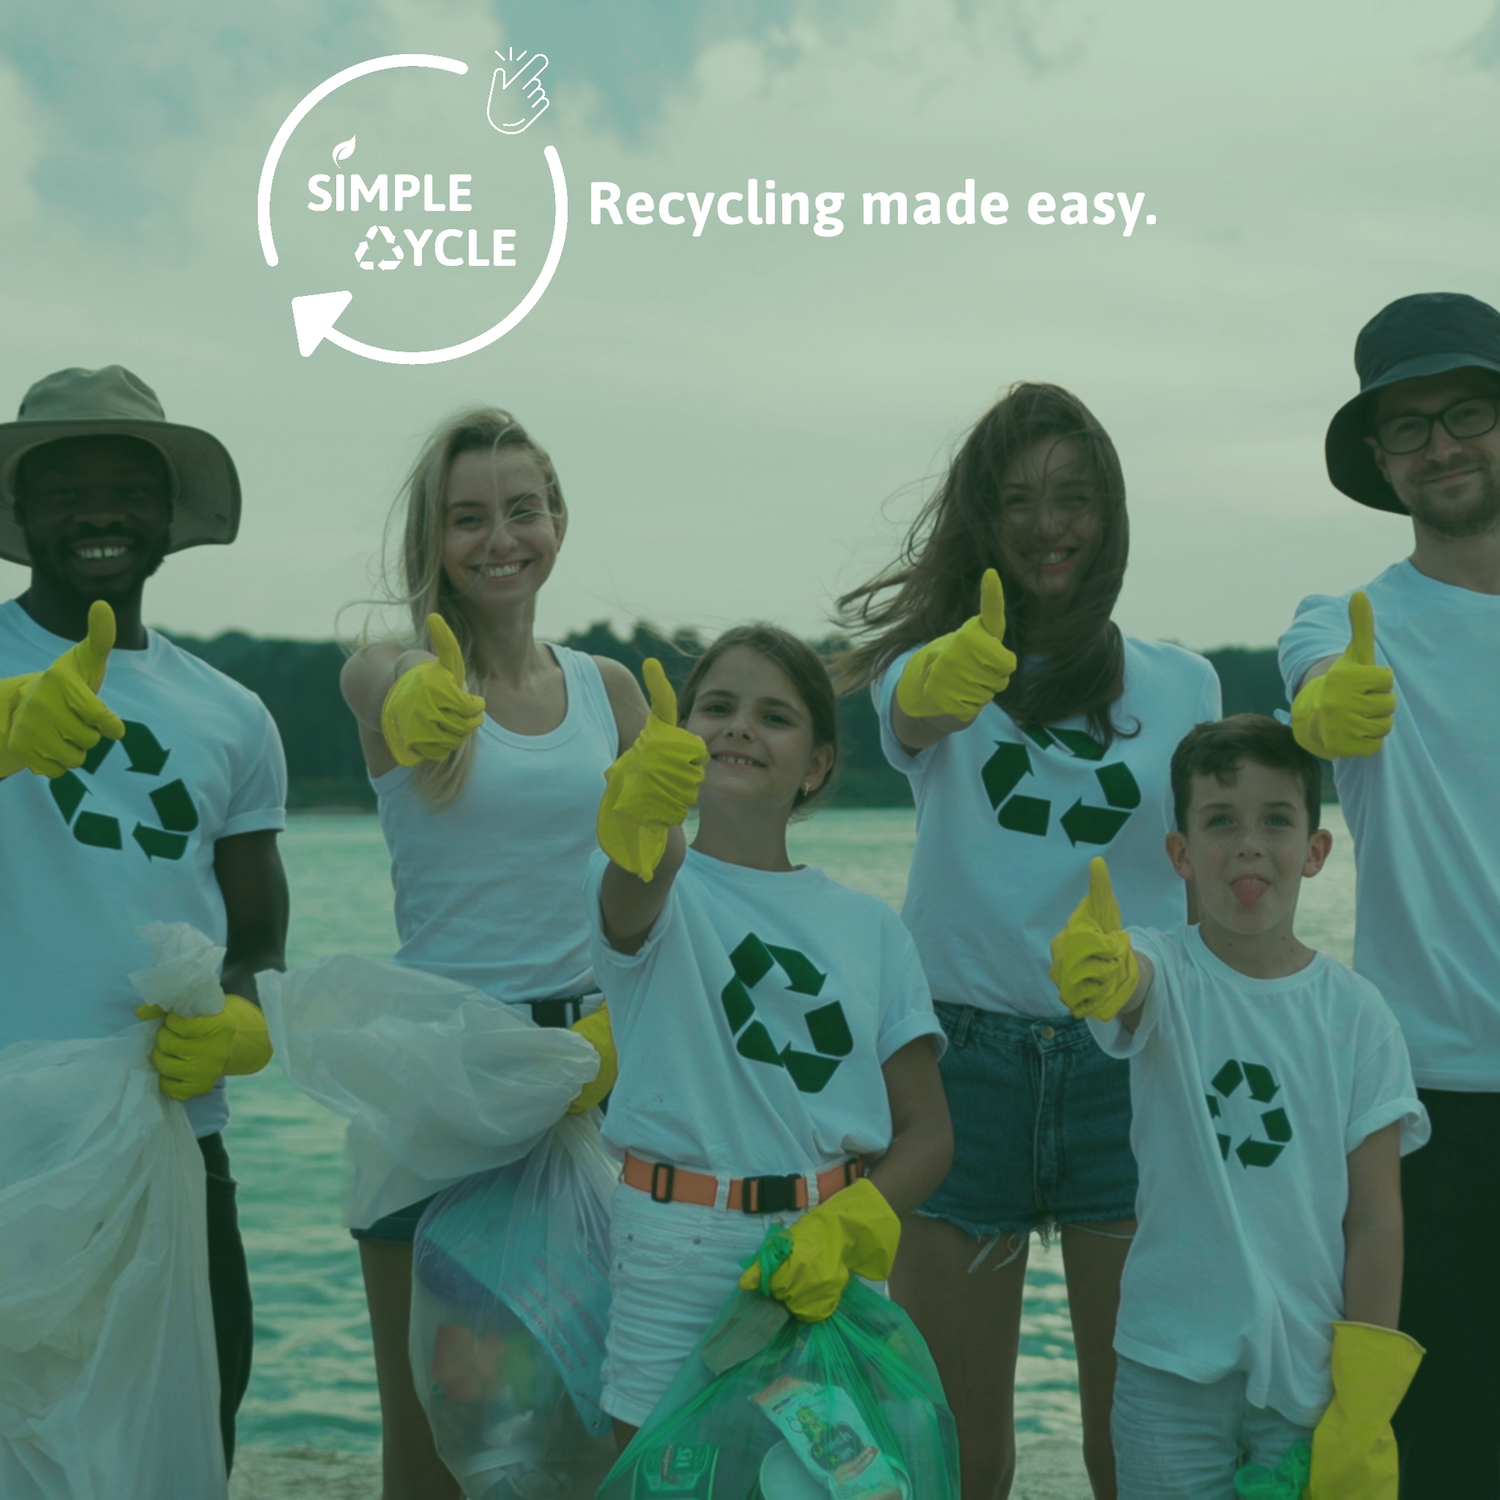 Family and friends wearing white recycling shirts with a green recycling logo in the middle. All smiling holding up a thumbs up with yellow gloves after recycling plastic waste from a beach.